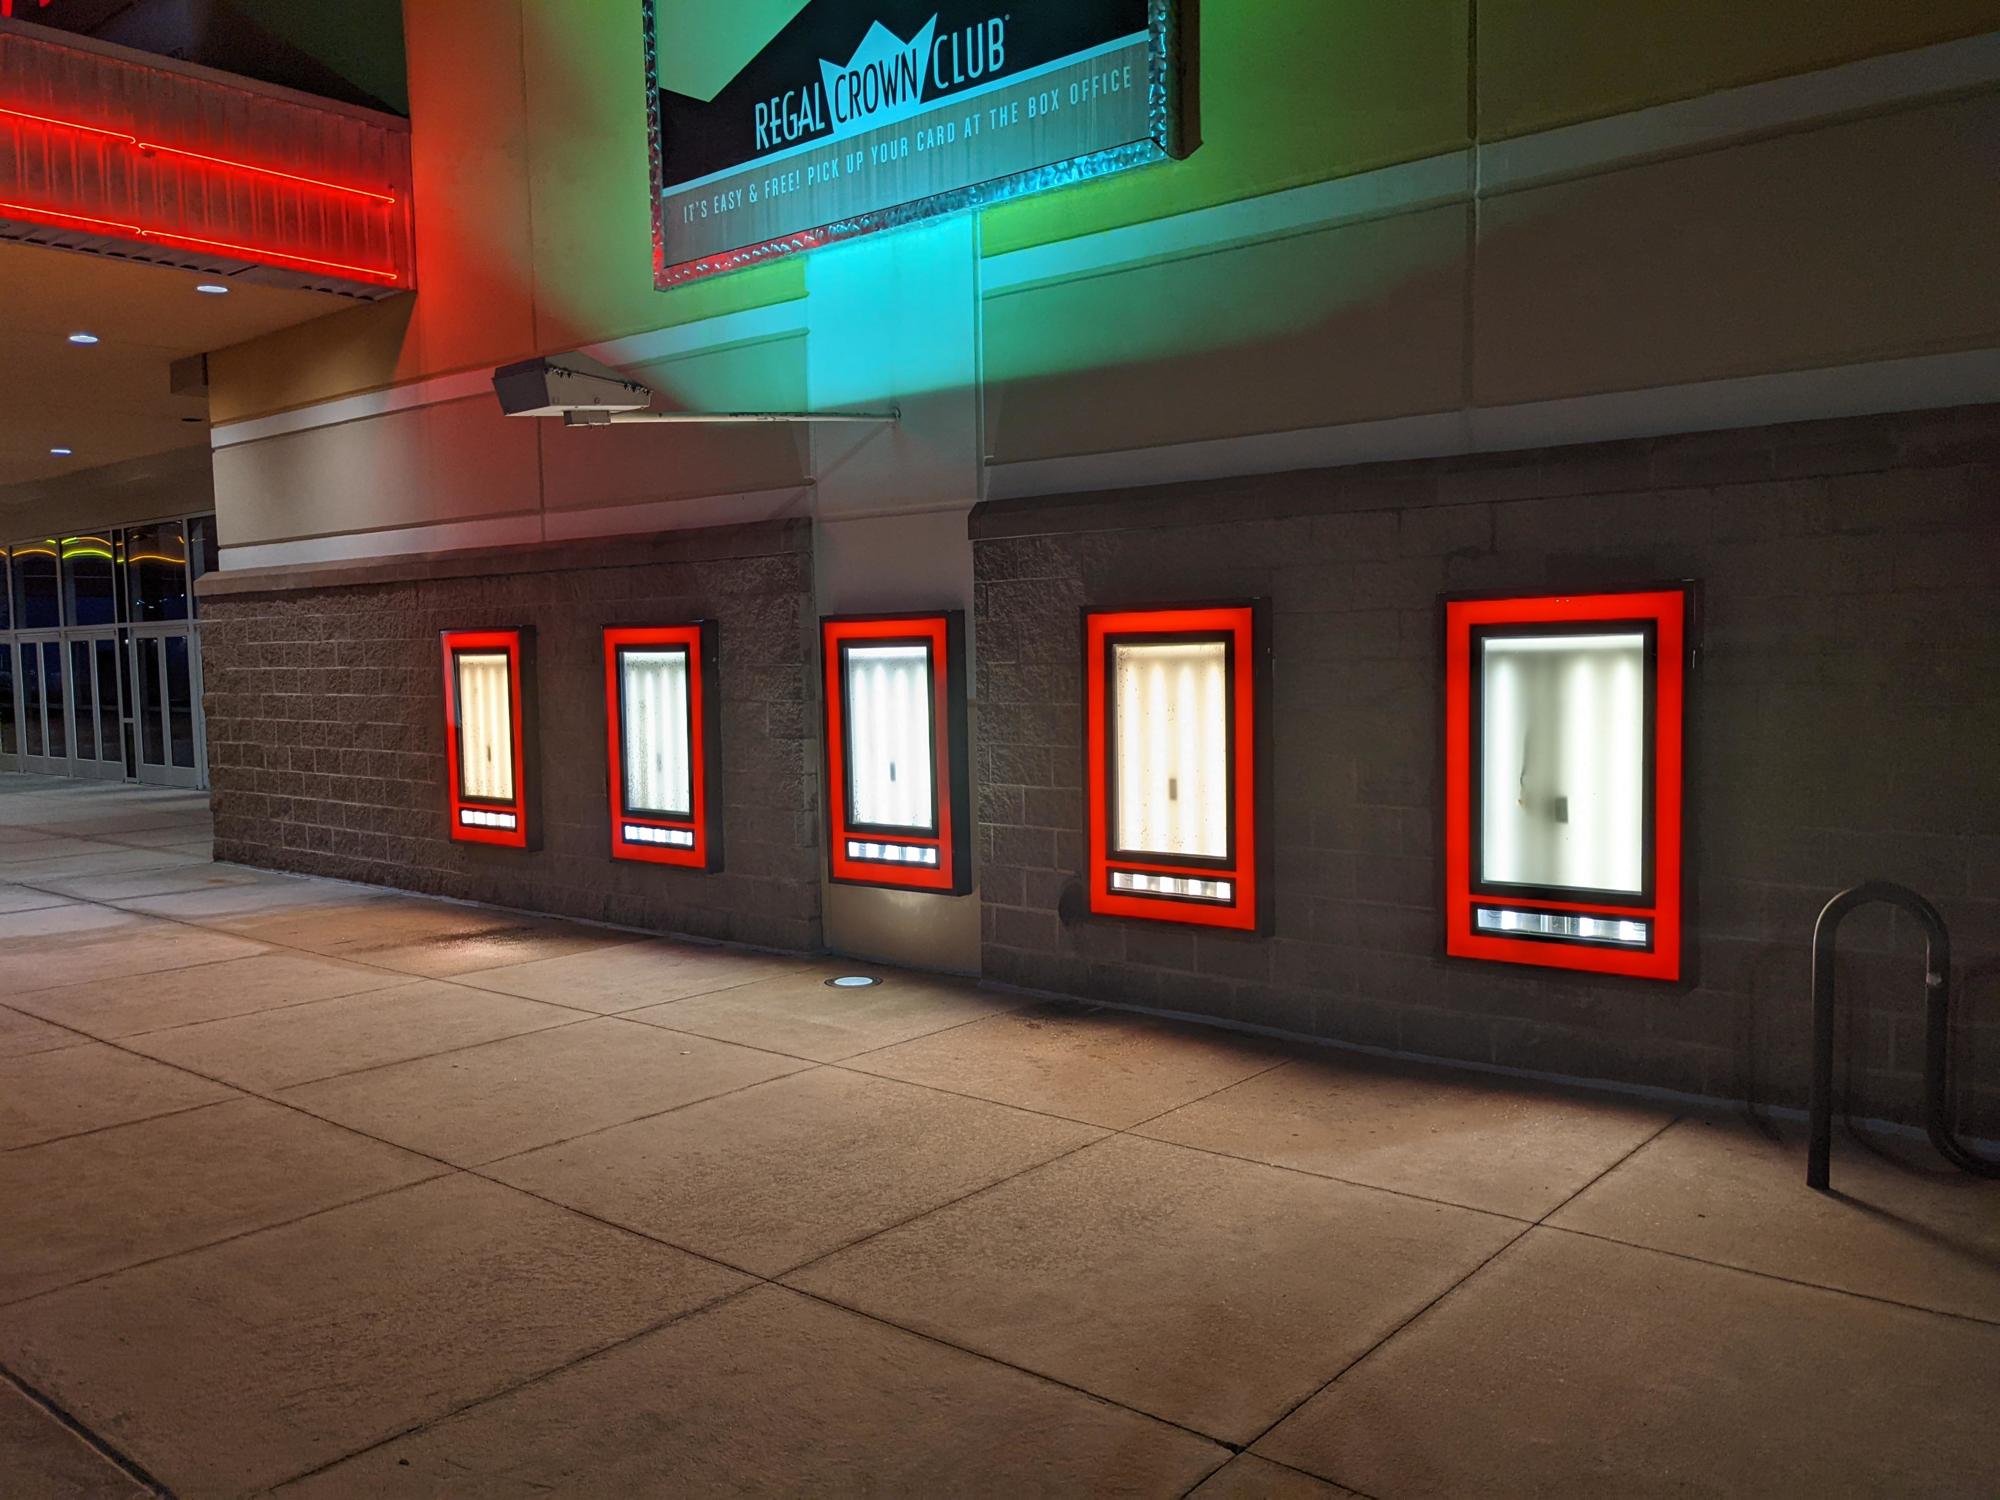 The exterior lights of the closed theater were on Aug. 27, but the now playing posters were removed.